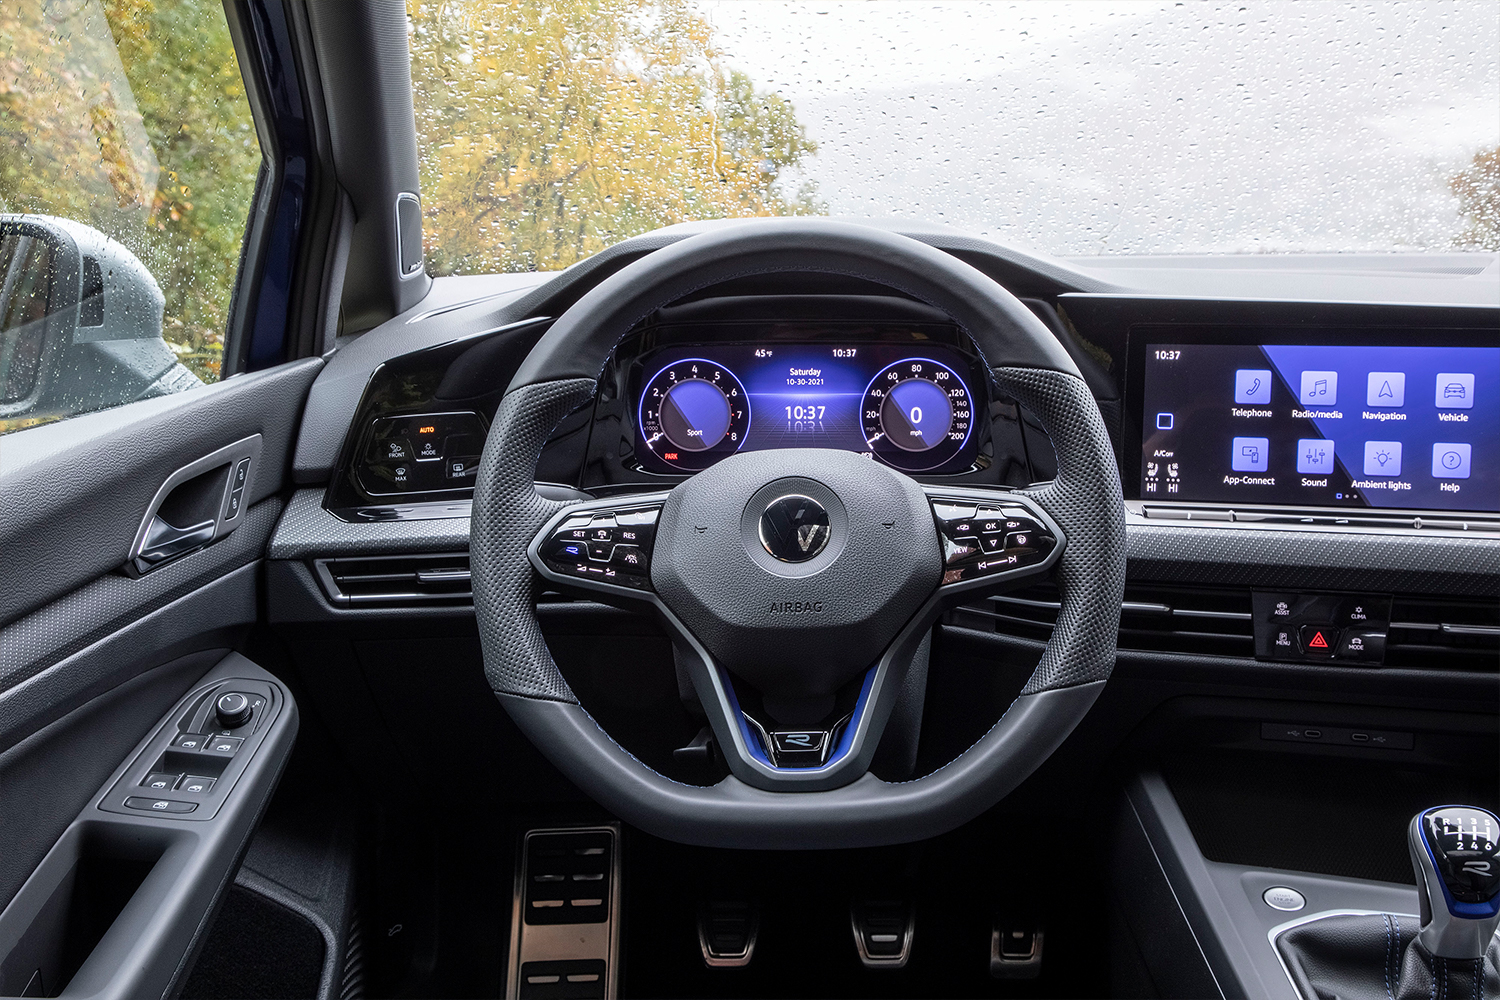 The steering wheel of the new 2022 Volkswagen Golf R hatchback, which we found to be less responsive than we would like during our testing and reviewing process